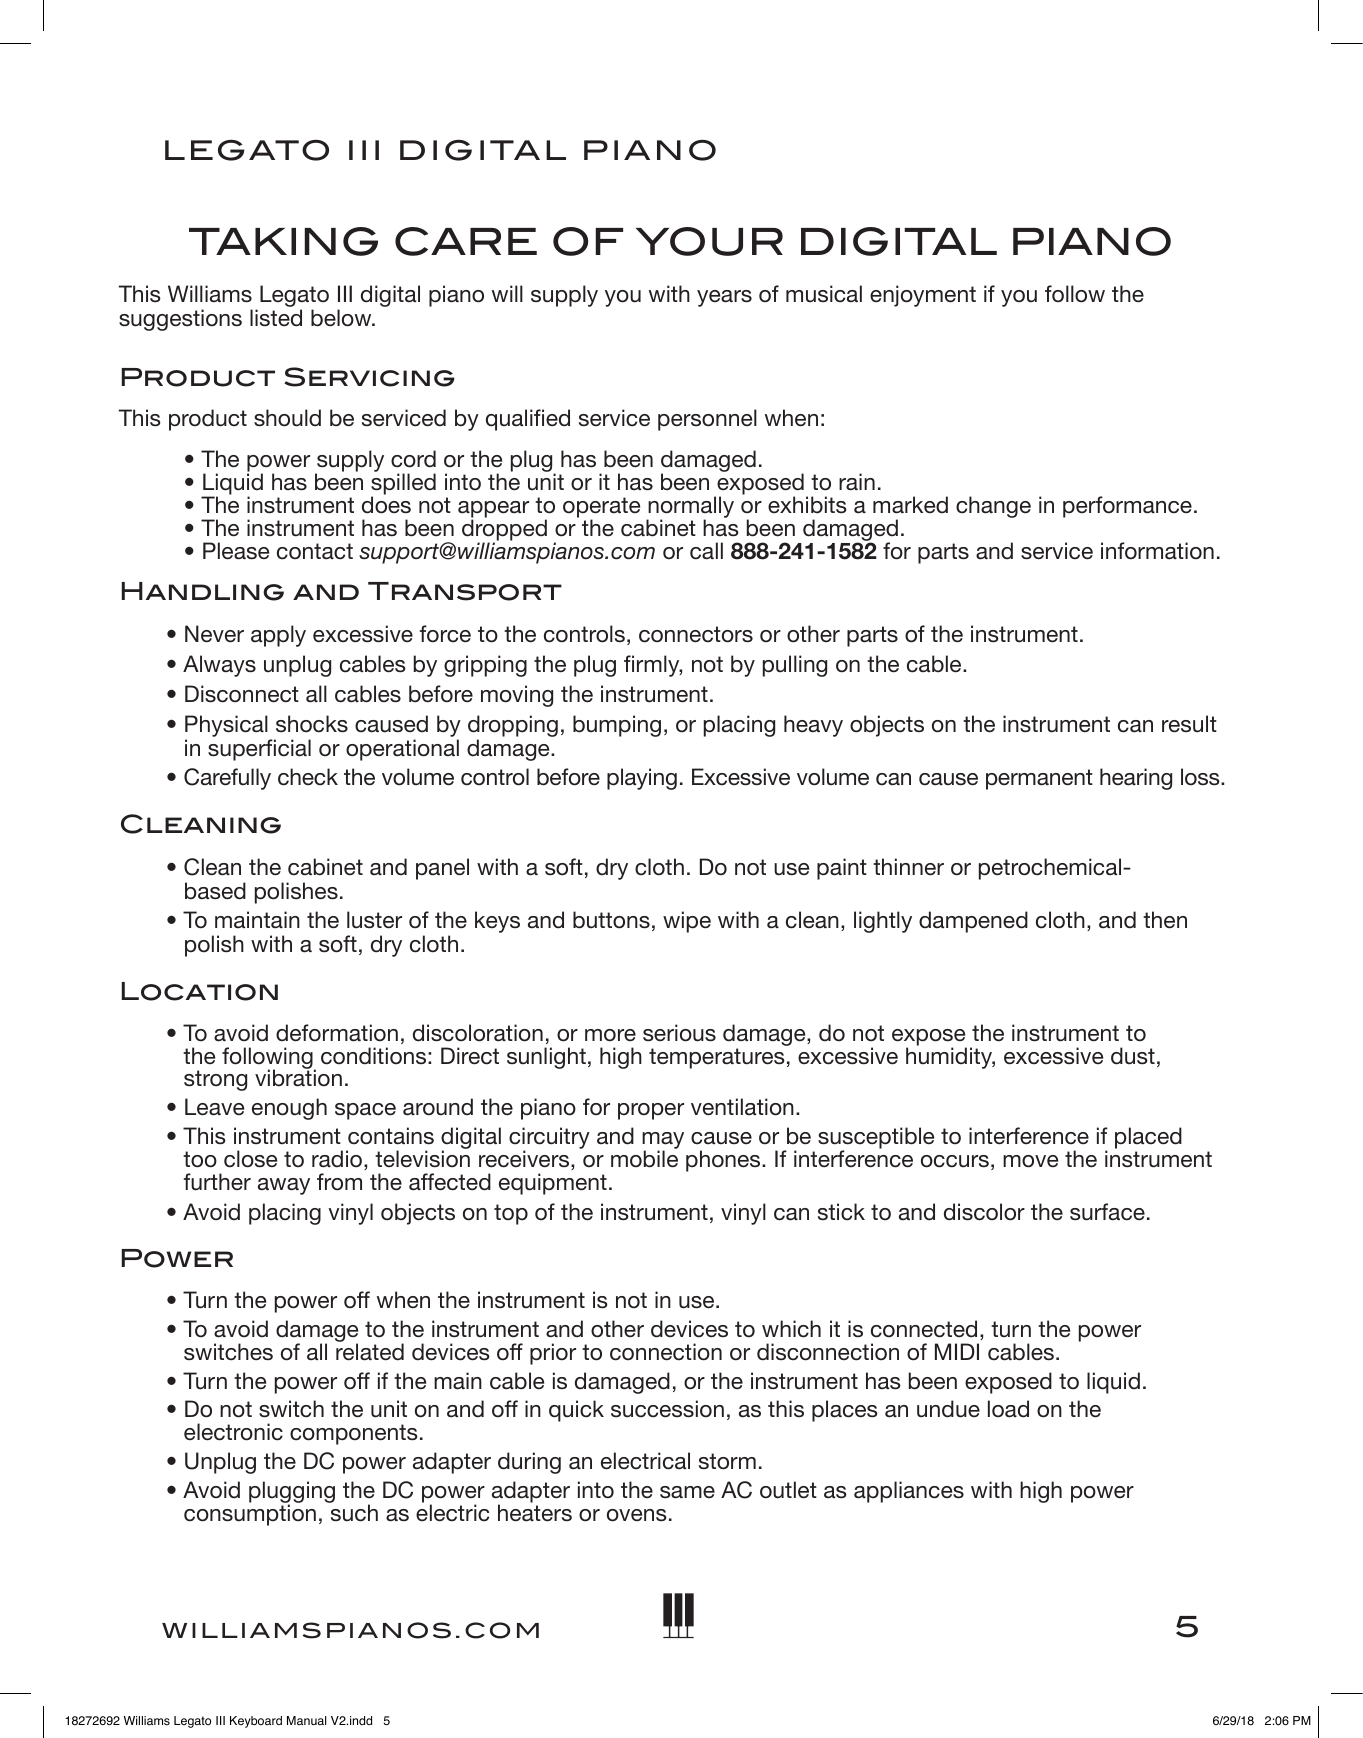 5LEGATO   III DIGITAL PIANOWILLIAMSPIANOS.COMTA K I NG CARE OF YOUR DIGITAL PIANOThis Williams Legato III digital piano will supply you with years of musical enjoyment if you follow the suggestions listed below.Product ServicingThis product should be serviced by qualied service personnel when:• The power supply cord or the plug has been damaged. • Liquid has been spilled into the unit or it has been exposed to rain. • The instrument does not appear to operate normally or exhibits a marked change in performance. • The instrument has been dropped or the cabinet has been damaged. • Please contact support@williamspianos.com or call 888-241-1582 for parts and service information.Handling and Transport•  Never apply excessive force to the controls, connectors or other parts of the instrument.•  Always unplug cables by gripping the plug rmly, not by pulling on the cable.•  Disconnect all cables before moving the instrument.•  Physical shocks caused by dropping, bumping, or placing heavy objects on the instrument can result  in supercial or operational damage.•  Carefully check the volume control before playing. Excessive volume can cause permanent hearing loss.Cleaning• Clean the cabinet and panel with a soft, dry cloth. Do not use paint thinner or petrochemical- based polishes.• To maintain the luster of the keys and buttons, wipe with a clean, lightly dampened cloth, and then polish with a soft, dry cloth.Location• To avoid deformation, discoloration, or more serious damage, do not expose the instrument to  the following conditions: Direct sunlight, high temperatures, excessive humidity, excessive dust,  strong vibration.• Leave enough space around the piano for proper ventilation.• This instrument contains digital circuitry and may cause or be susceptible to interference if placed too close to radio, television receivers, or mobile phones. If interference occurs, move the instrument further away from the affected equipment.• Avoid placing vinyl objects on top of the instrument, vinyl can stick to and discolor the surface.Power• Turn the power off when the instrument is not in use.• To avoid damage to the instrument and other devices to which it is connected, turn the power  switches of all related devices off prior to connection or disconnection of MIDI cables.• Turn the power off if the main cable is damaged, or the instrument has been exposed to liquid.• Do not switch the unit on and off in quick succession, as this places an undue load on the  electronic components.• Unplug the DC power adapter during an electrical storm.• Avoid plugging the DC power adapter into the same AC outlet as appliances with high power consumption, such as electric heaters or ovens.18272692 Williams Legato III Keyboard Manual V2.indd   5 6/29/18   2:06 PM